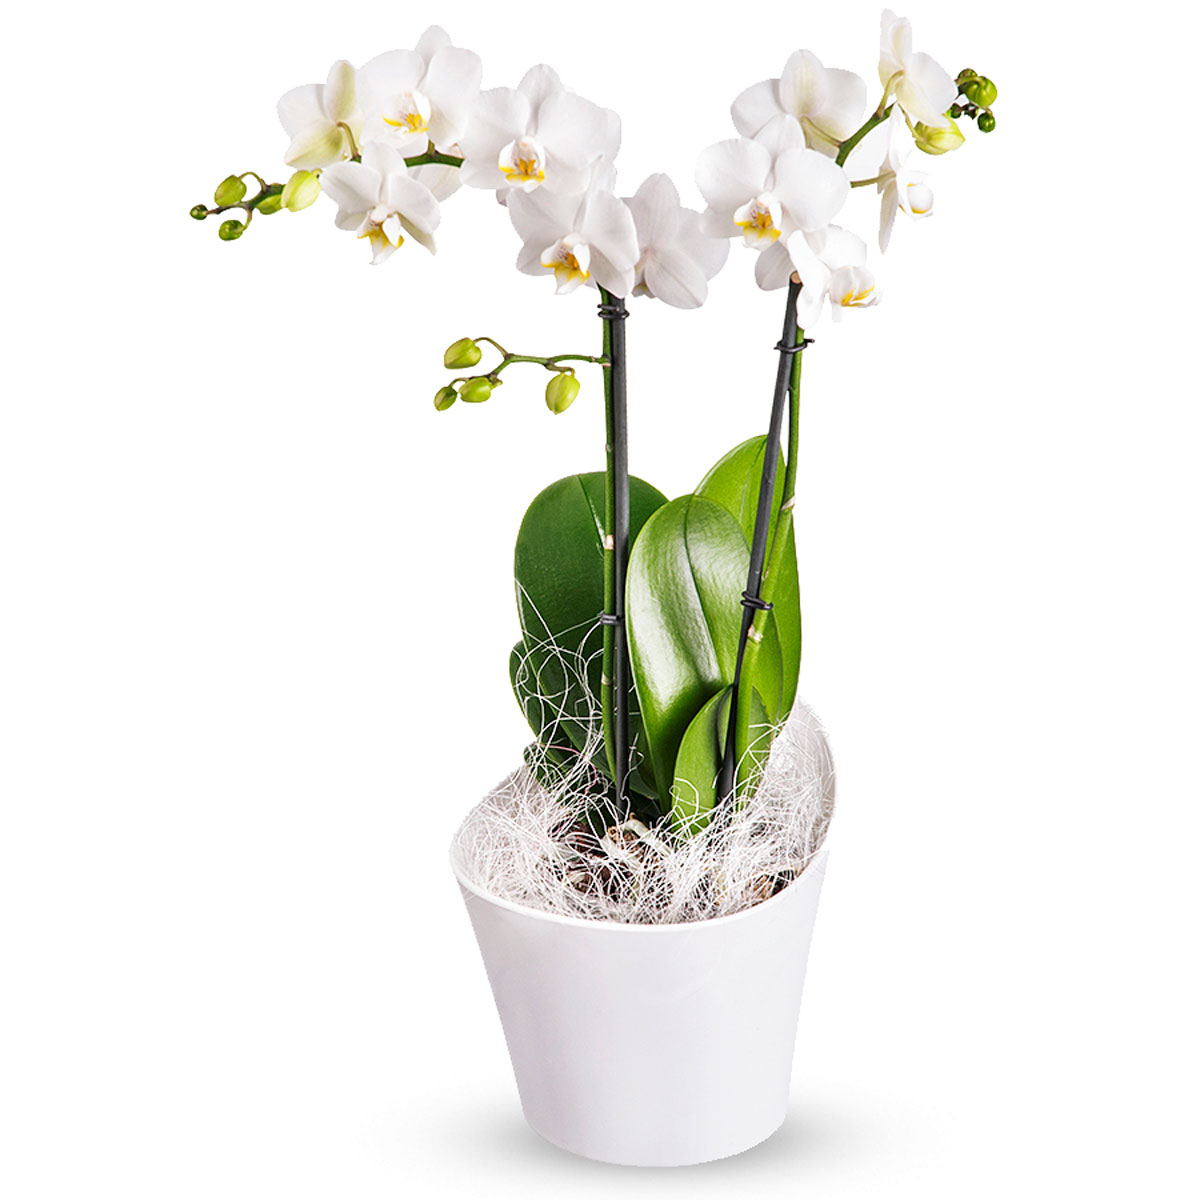 Phalaenopsis Orchid - Delivery in Belgium by GiftsForEurope